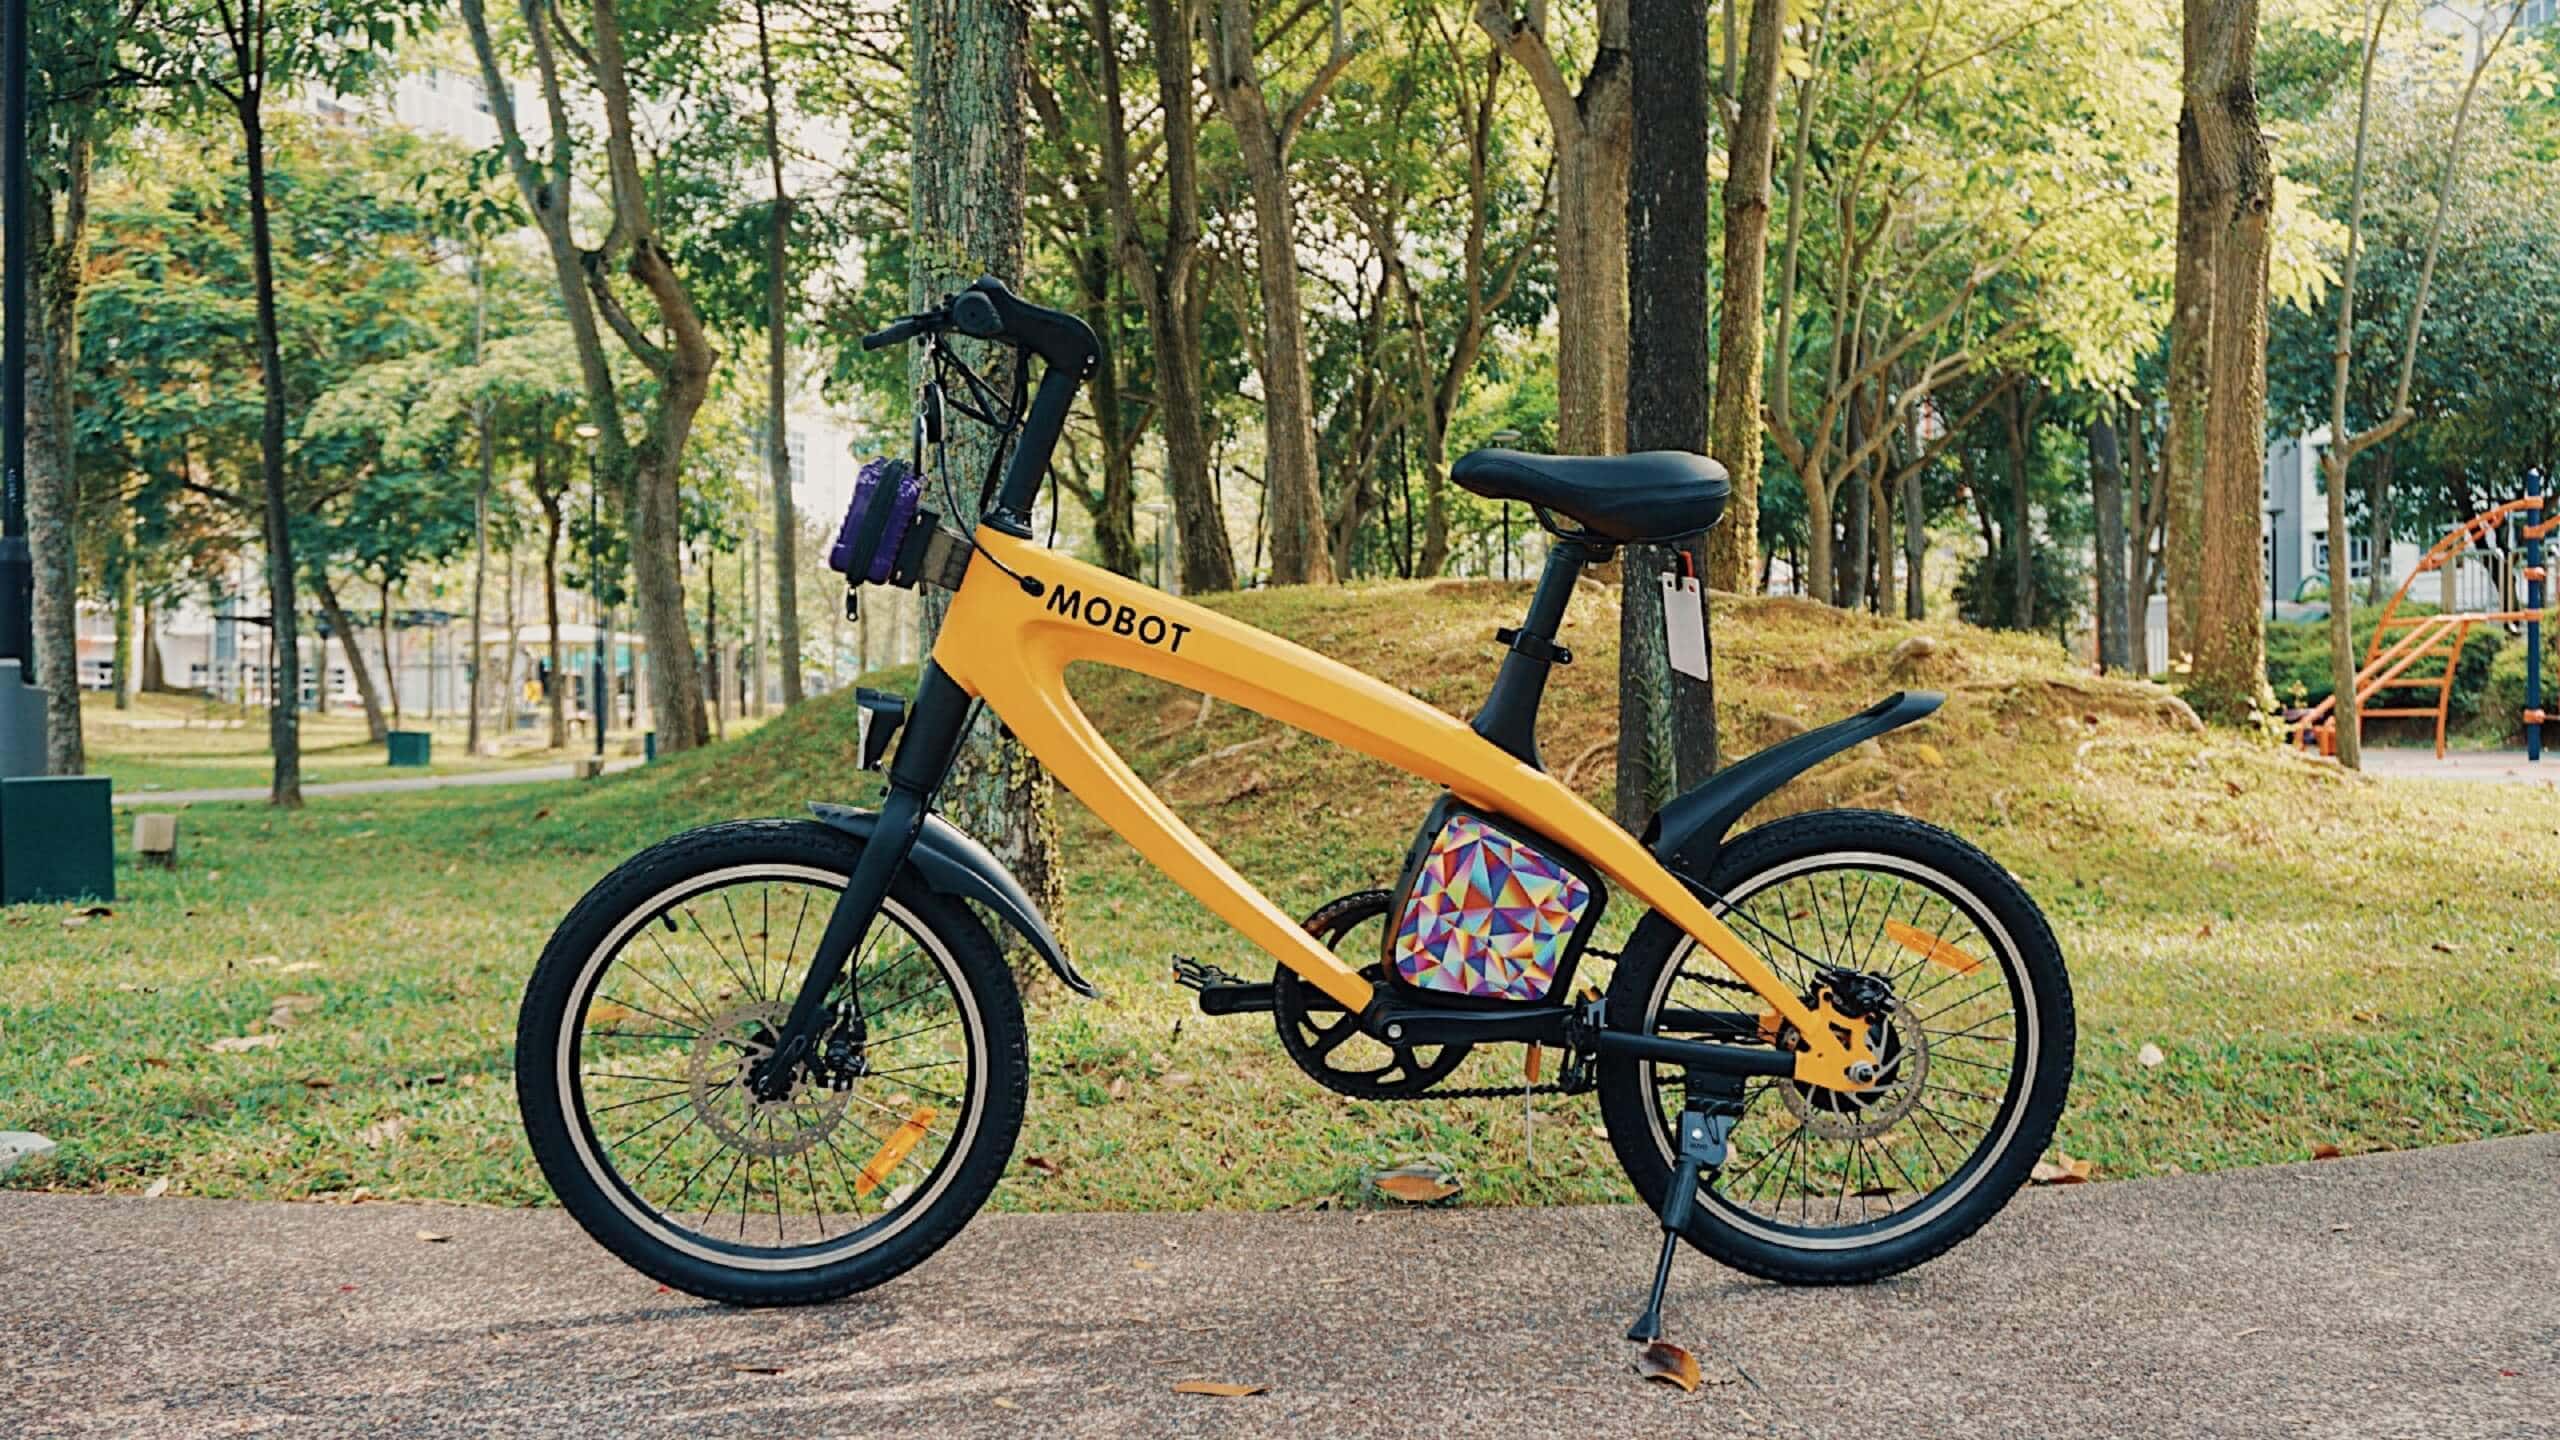 MOBOT OVO (ORANGE) LTA approved electric bicycle at Woodlands (1)